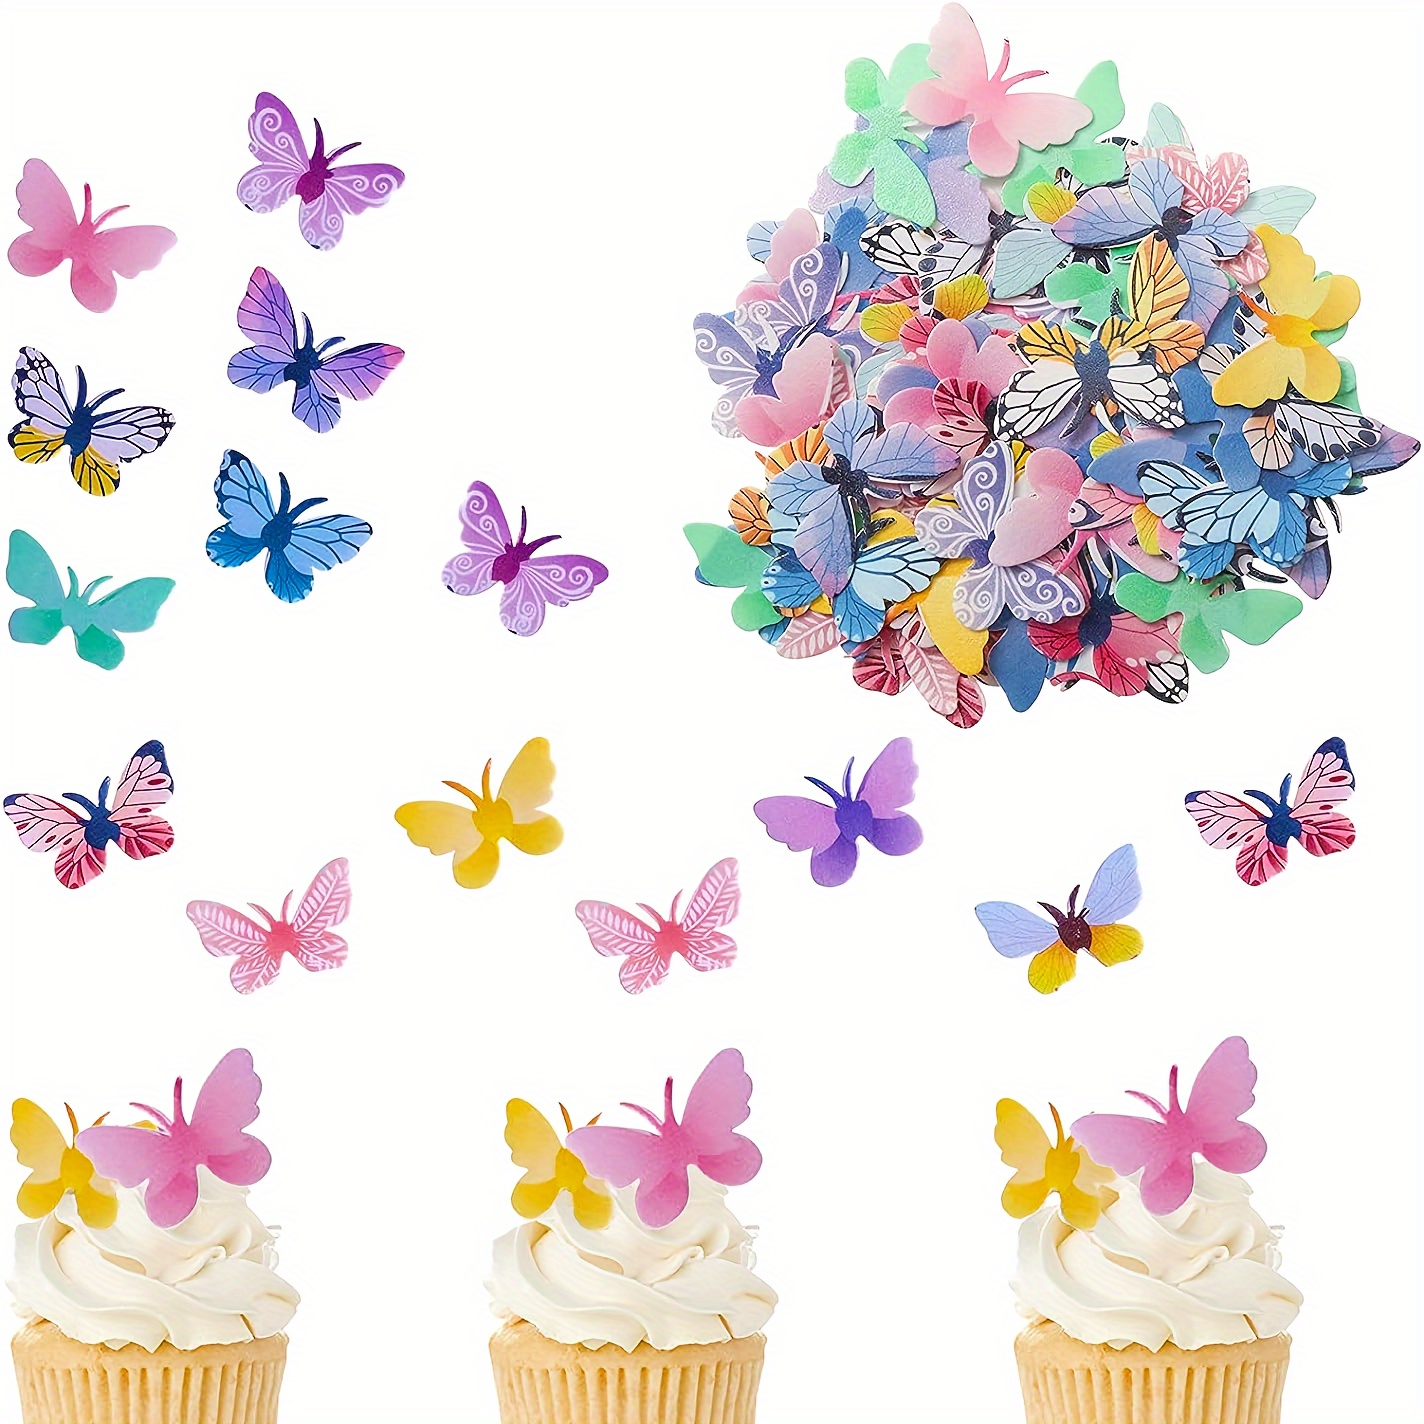 30pcs/bag Butterfly Edible Cake Decorations Wafer Rice Paper